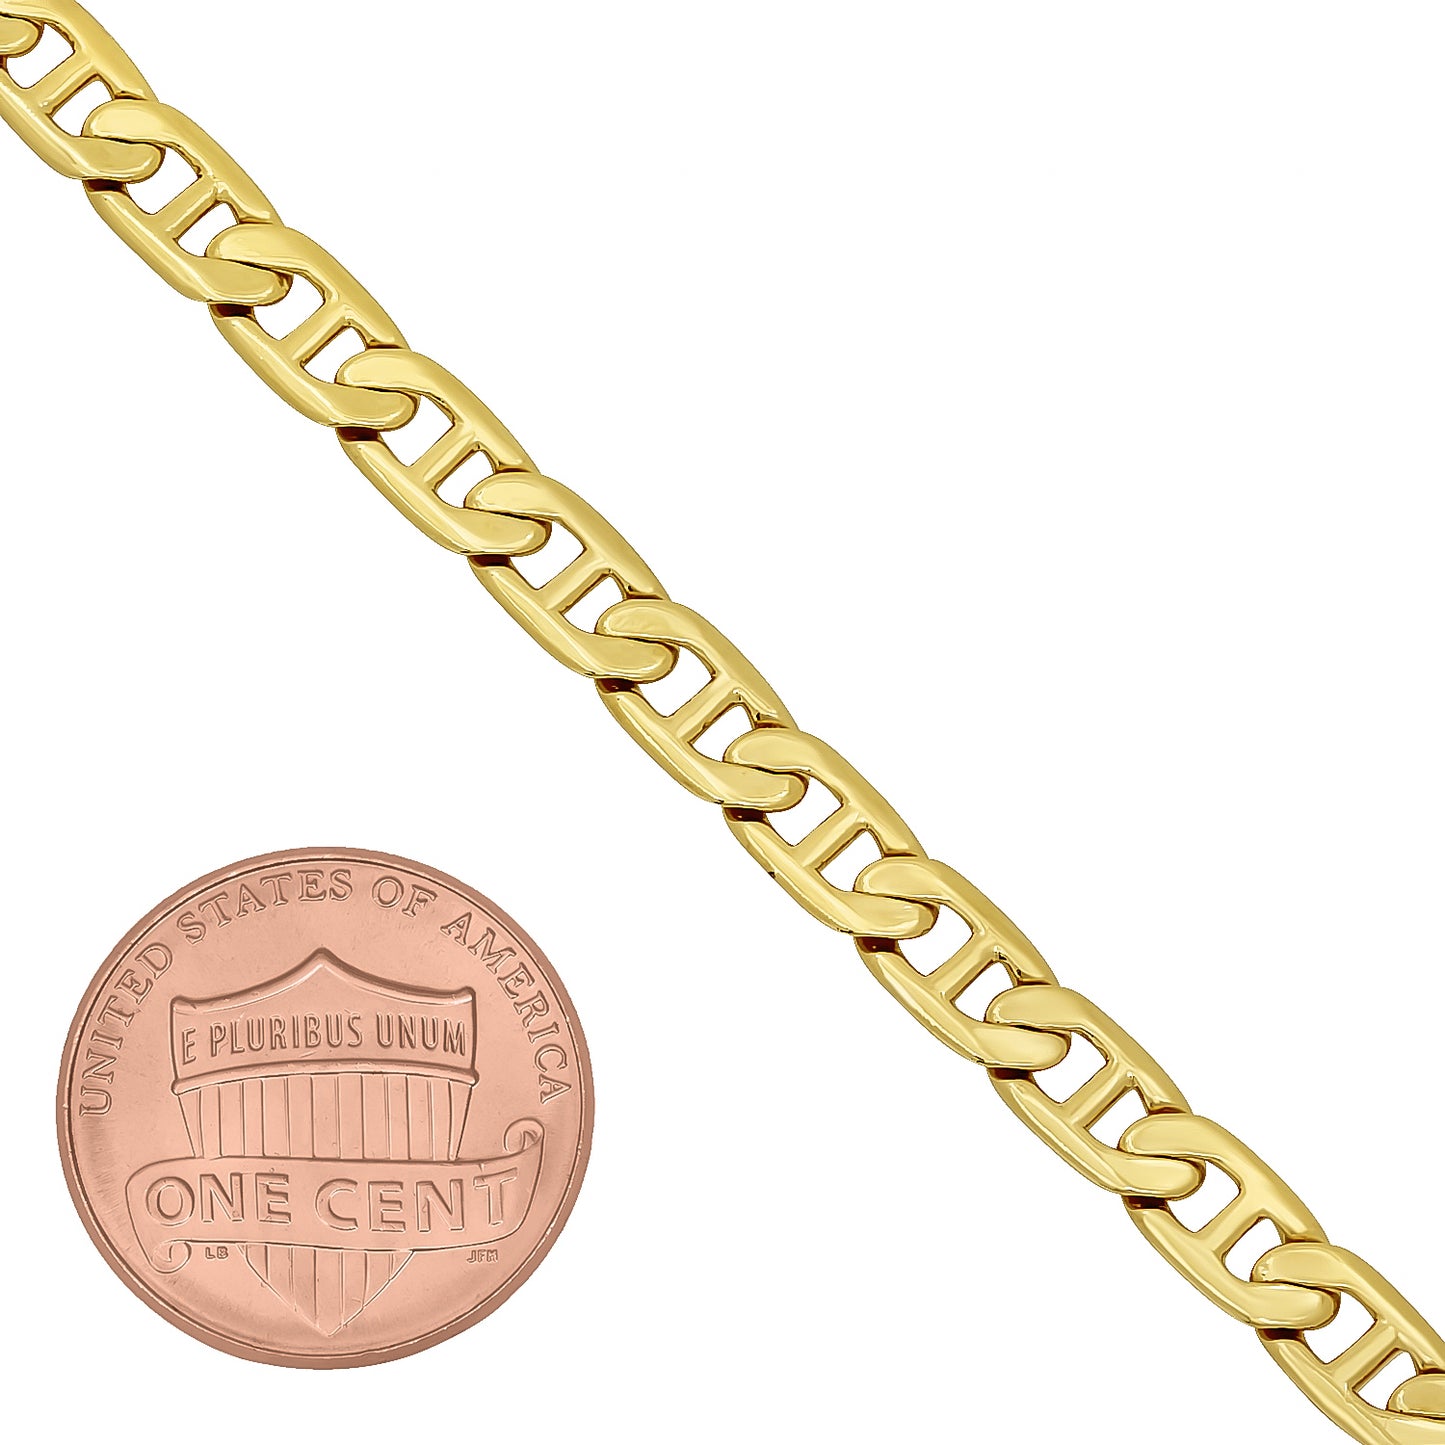 3mm-12mm 14k Yellow Gold Plated Flat Mariner Chain Necklace or Bracelet (SKU: GL-MARINER-CHAINS)